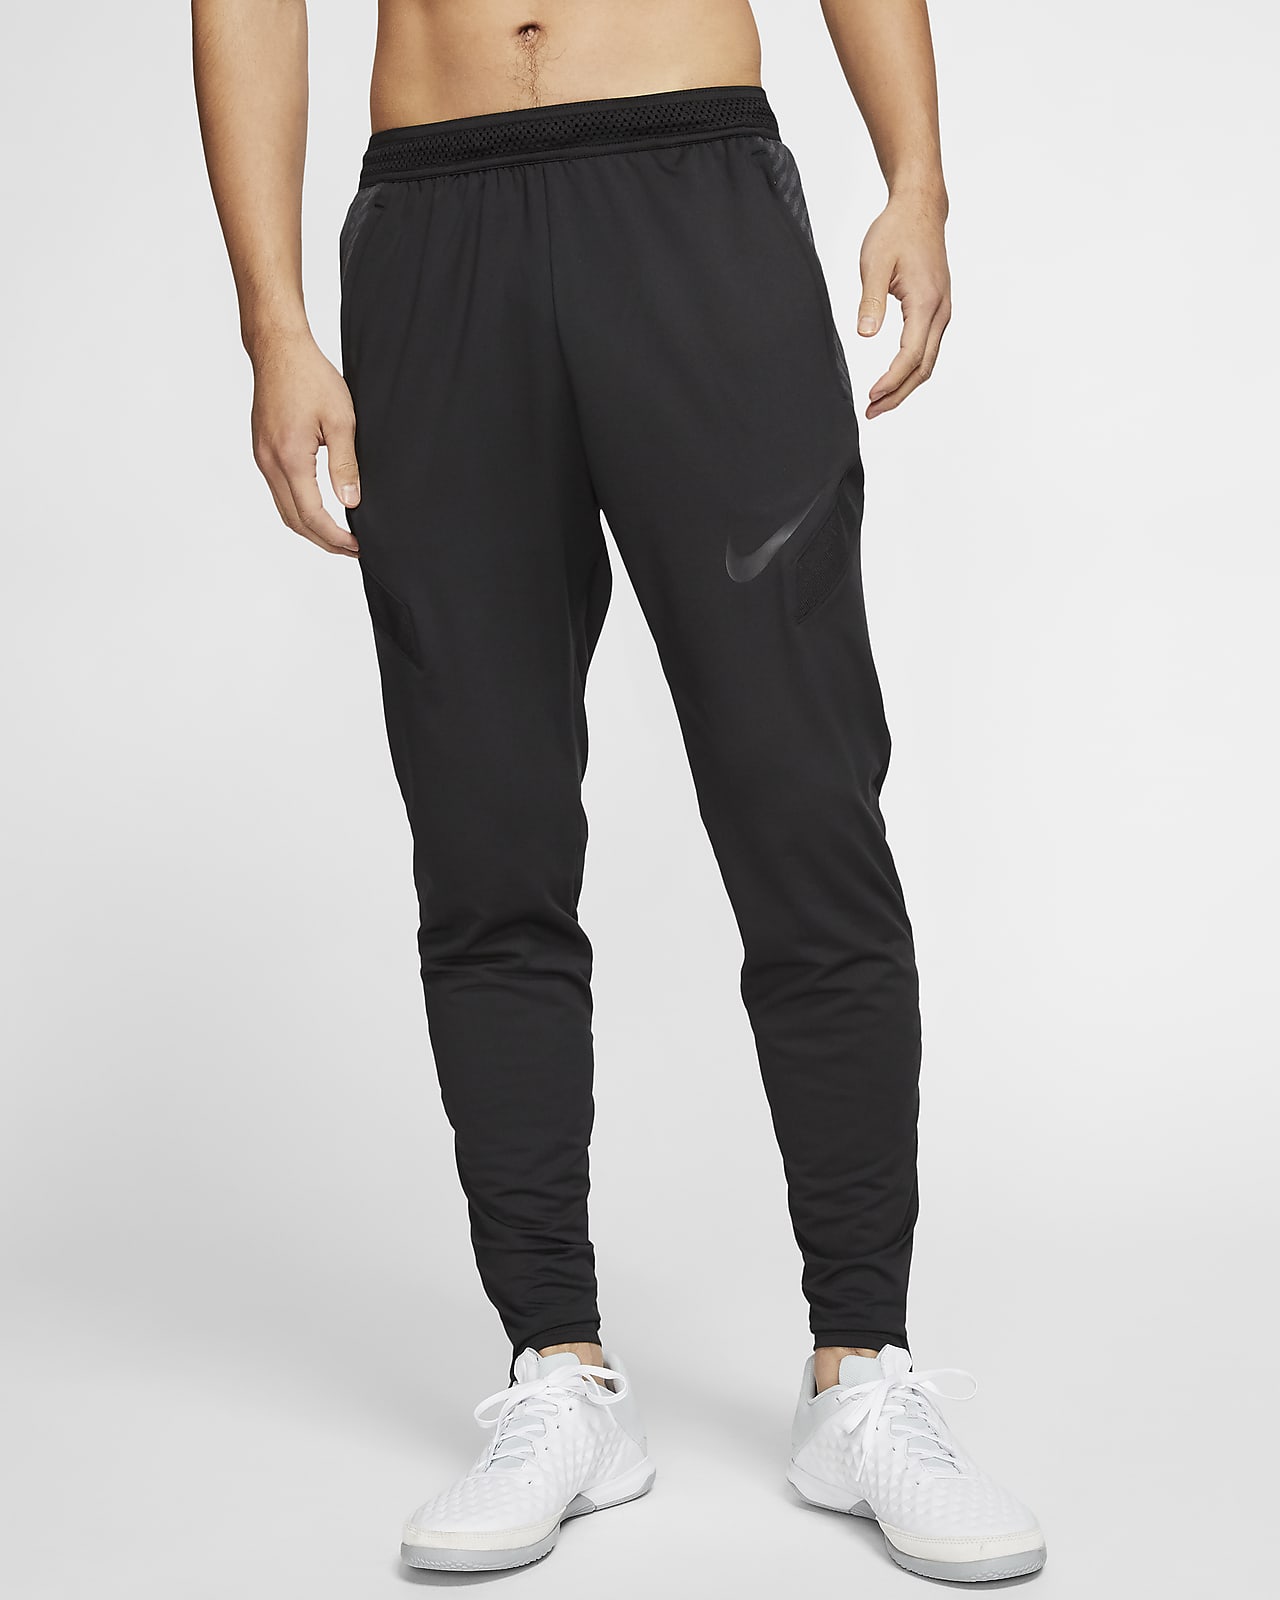 nike youth integrated football pants